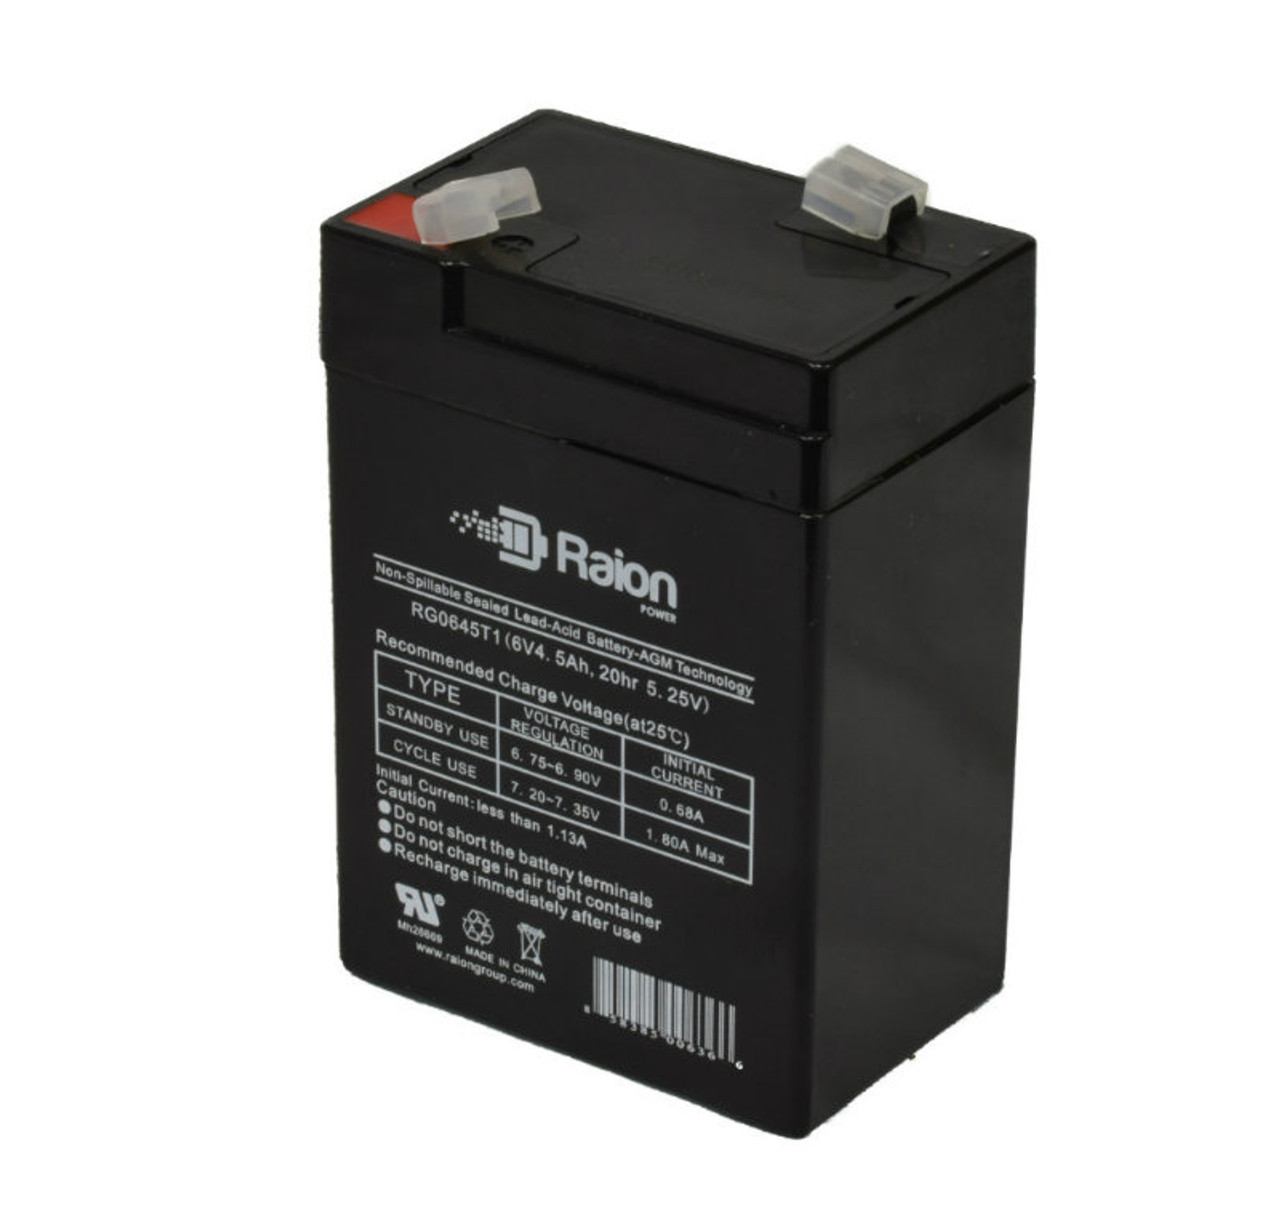 Raion Power RG0645T1 6V 4.5Ah Replacement Battery Cartridge for MaxPower NP4.5-6T